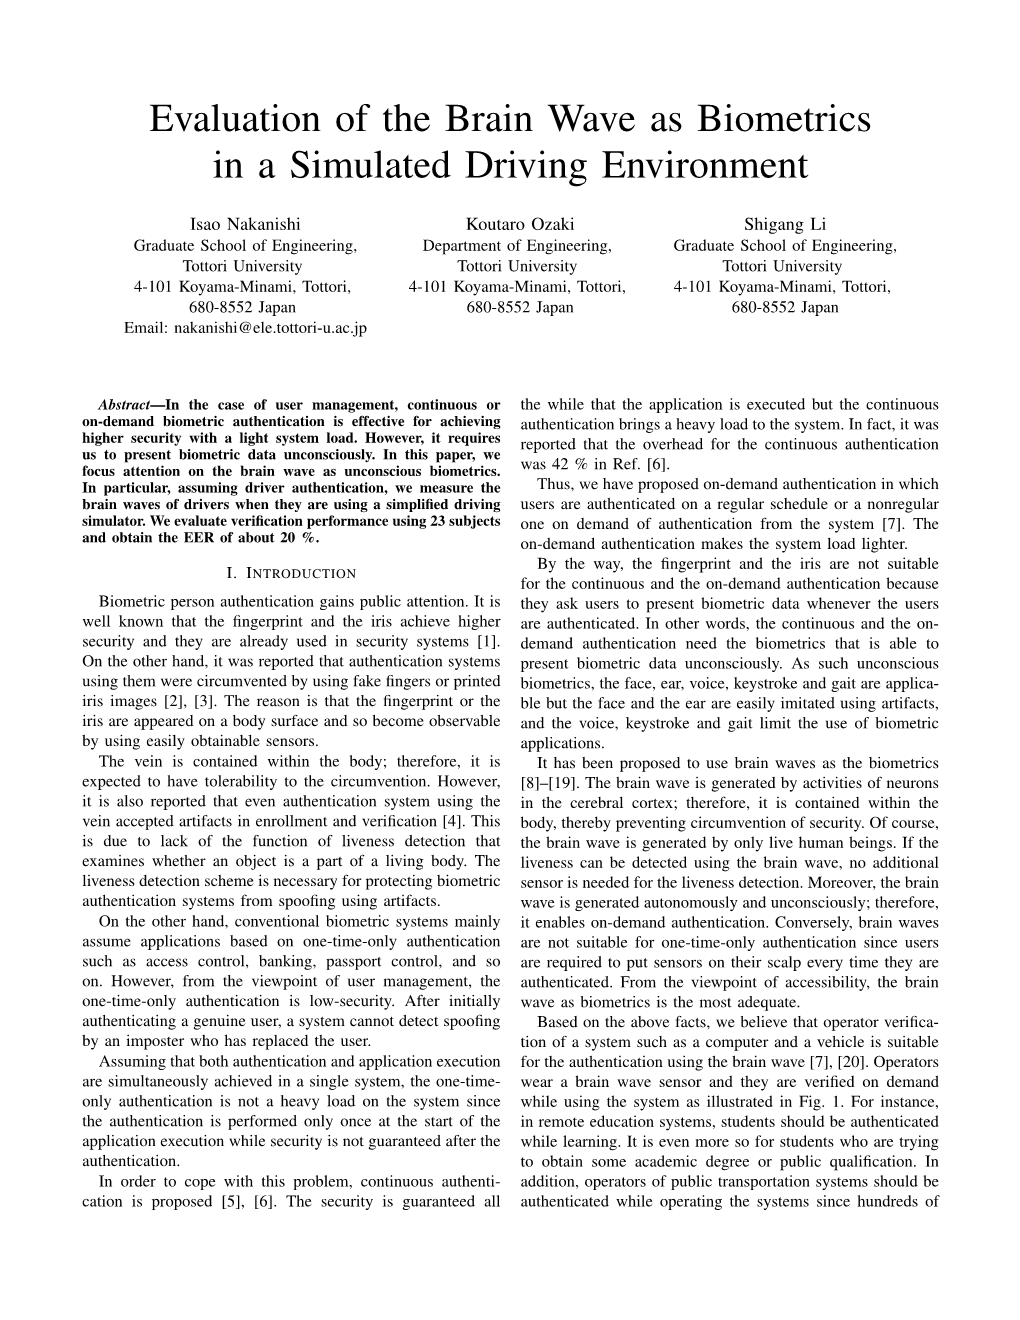 Evaluation of the Brain Wave As Biometrics in a Simulated Driving Environment